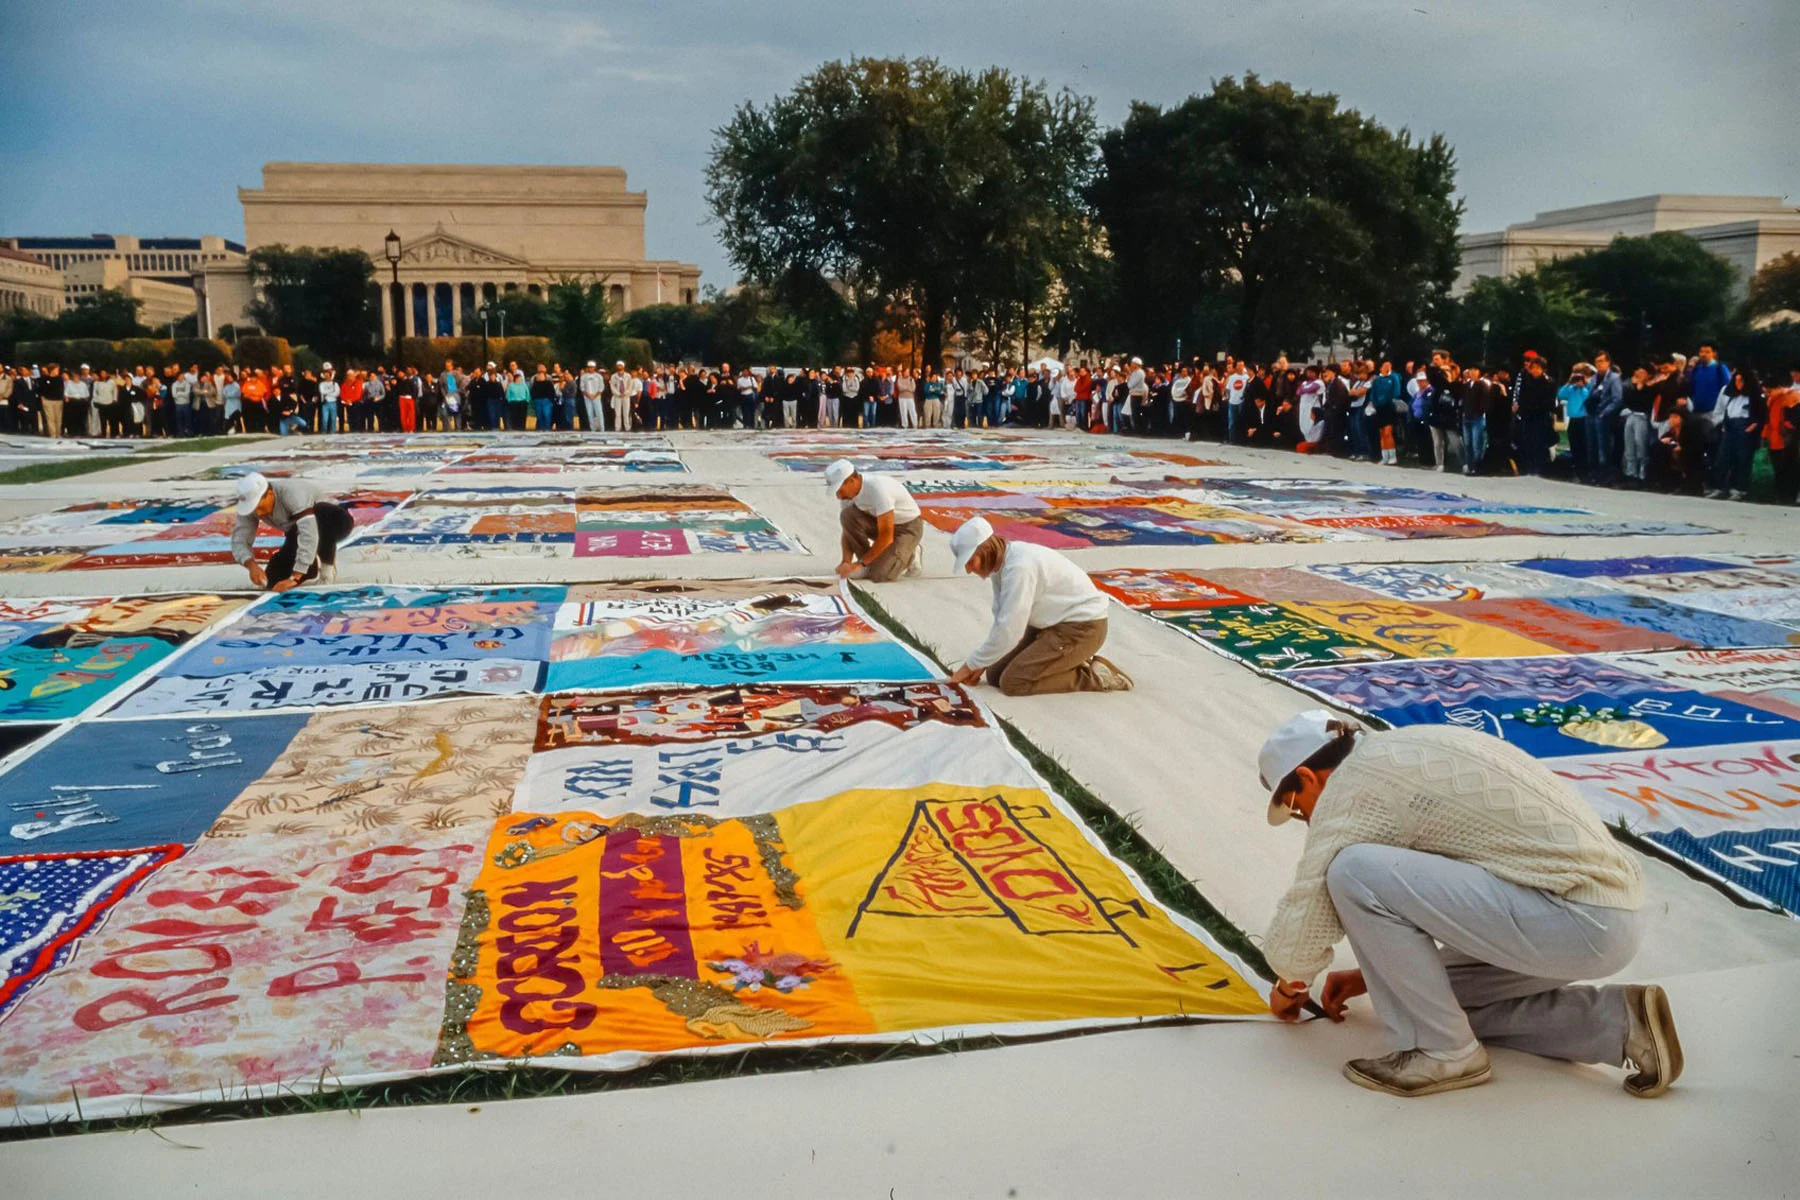 A color photograph of colorful hand-sewn quilts being laid down on the grass by four figures in the foreground. All wear white. Lines of protestors are visible behind them.